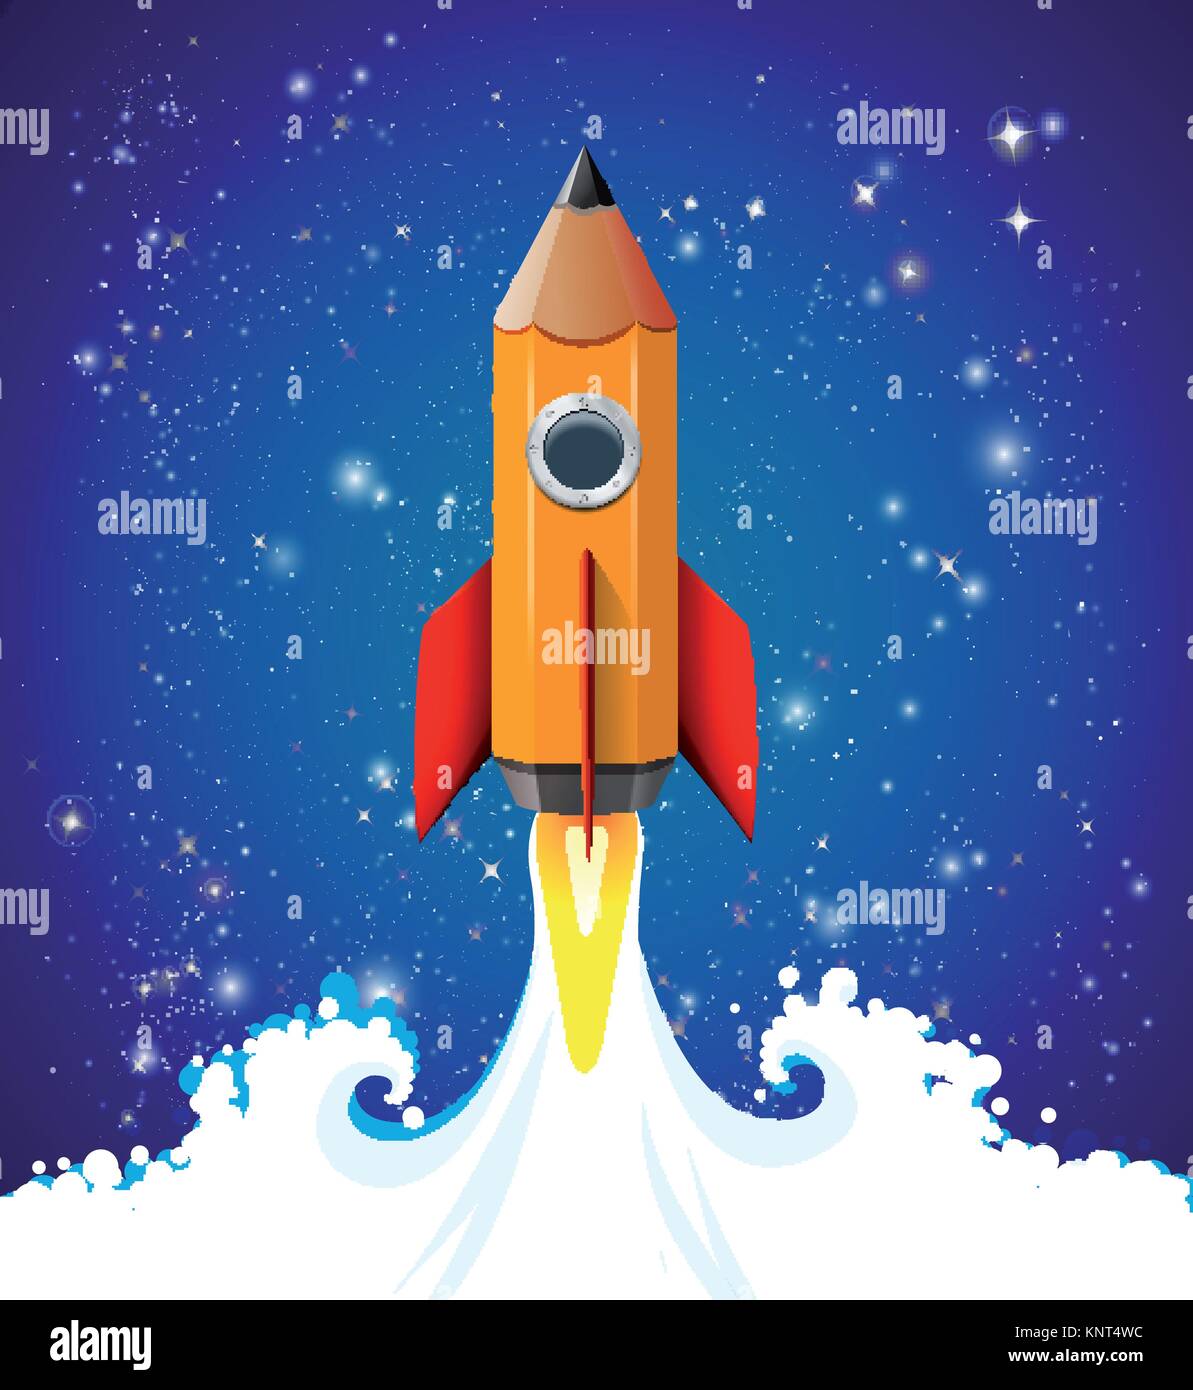 Creative idea concept - pencil as speed rocket climbing to the sky - wisdom and knowledge – stock illustration Stock Vector